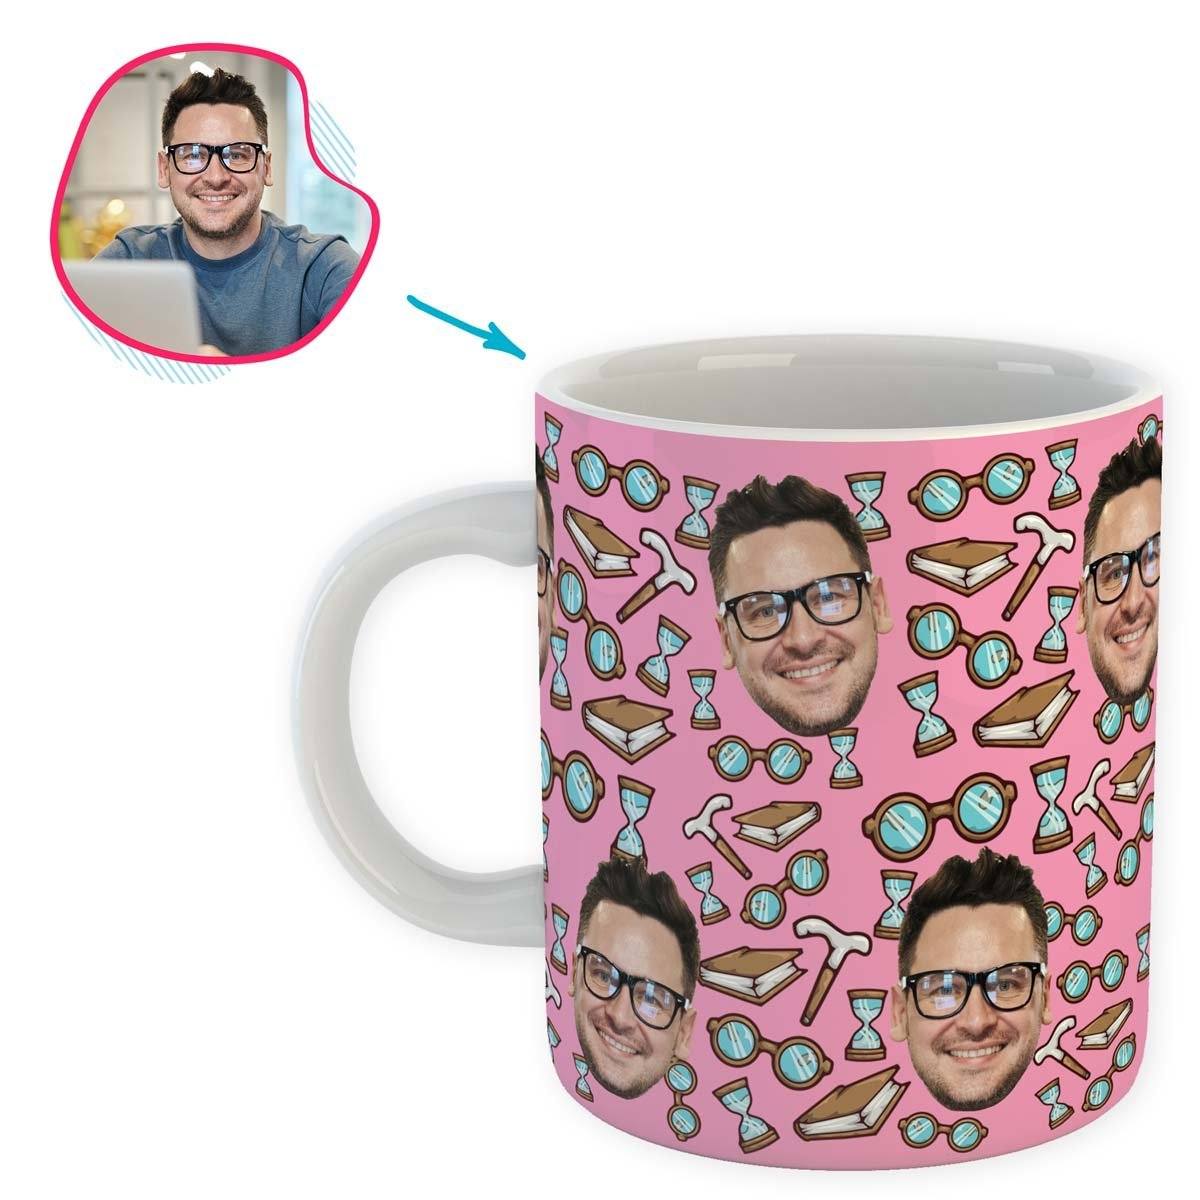 Pink Retirement personalized mug with photo of face printed on it